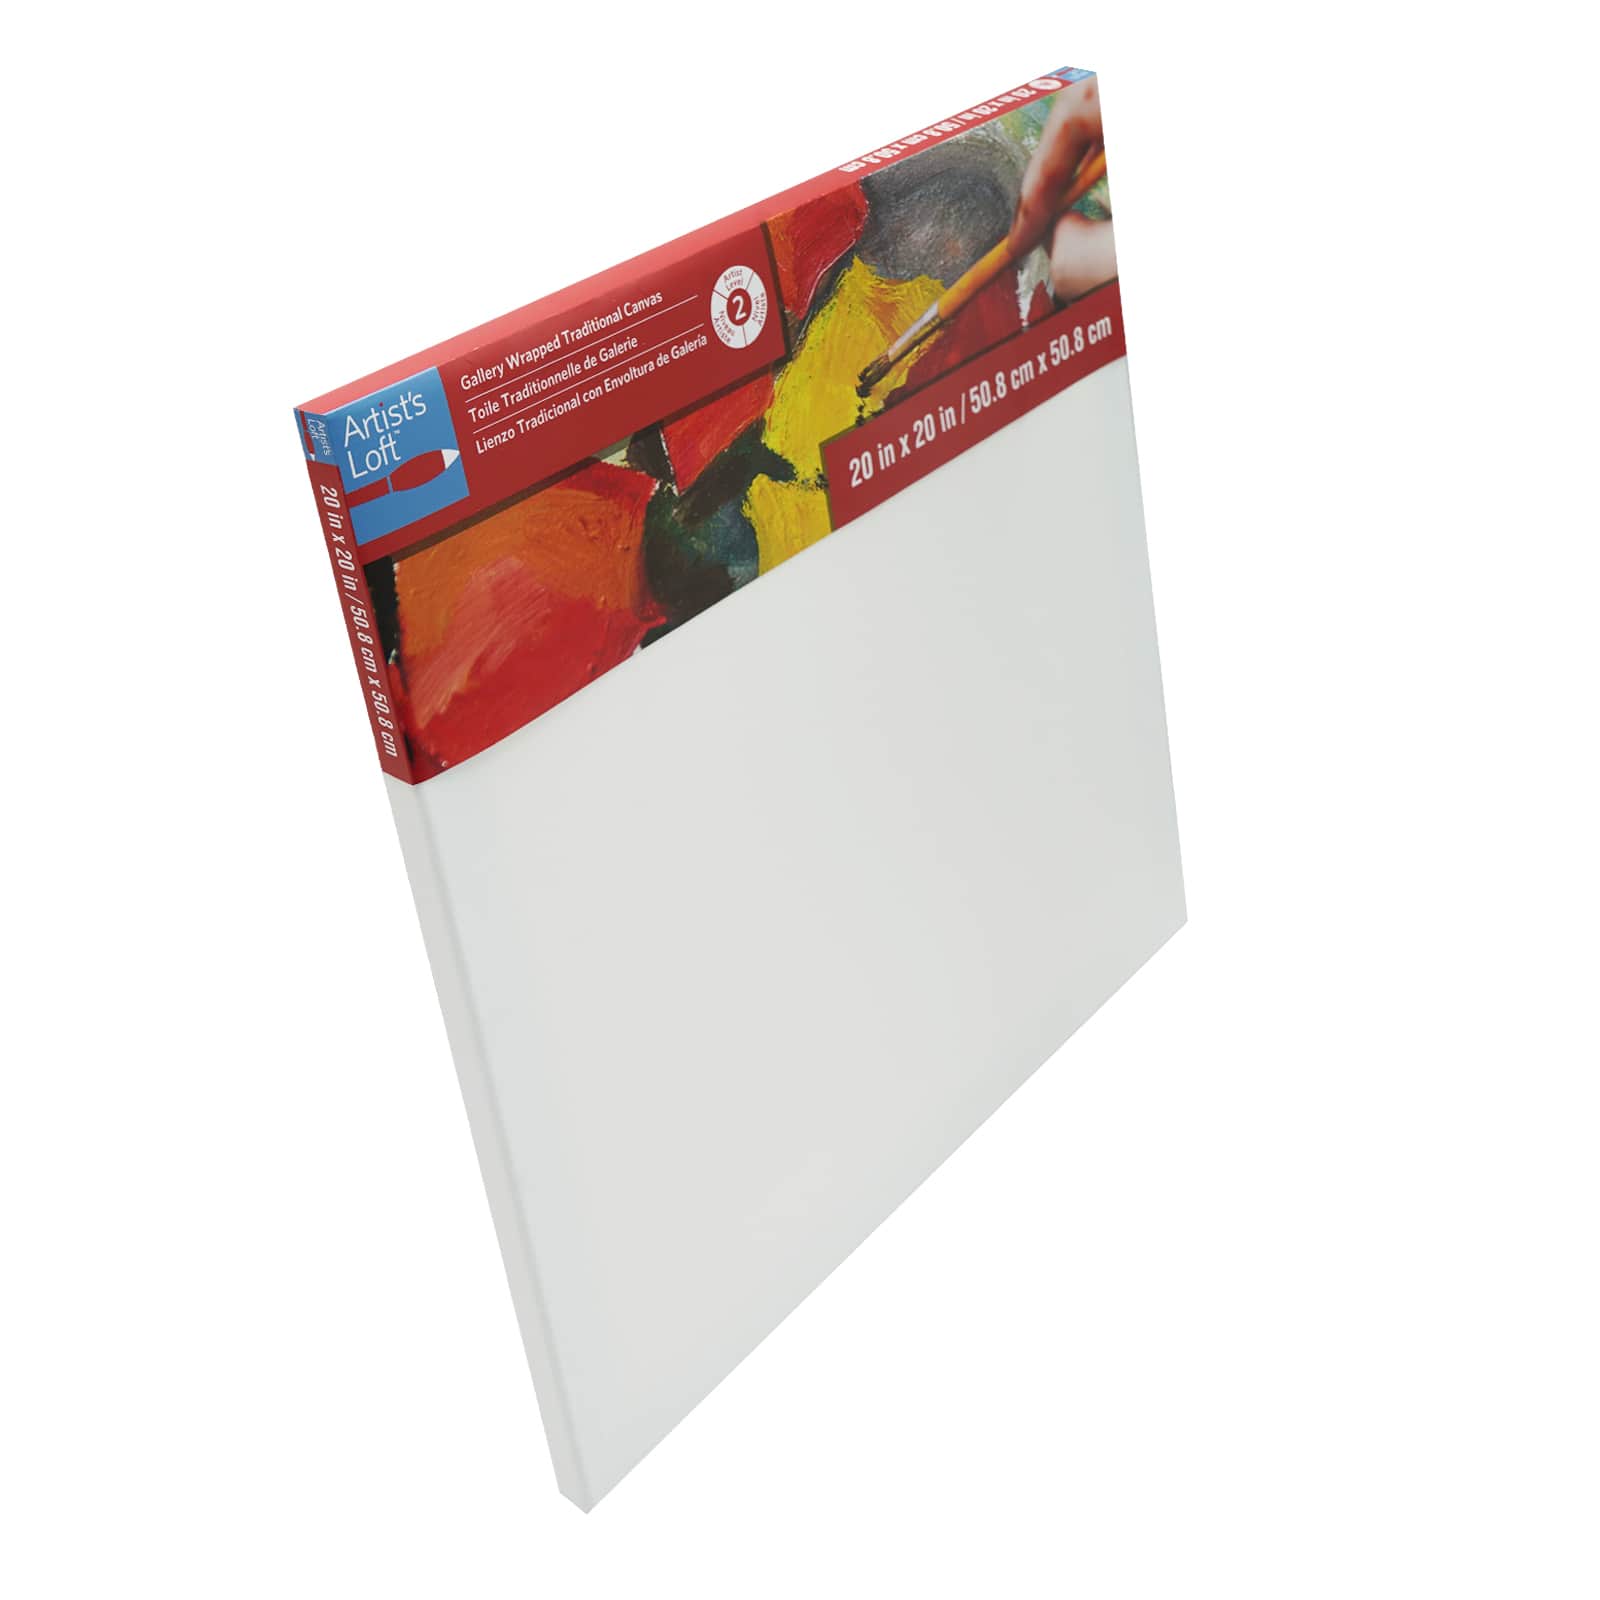 12 Pack: Level 2 Gallery Wrapped Traditional Canvas by Artist&#x27;s Loft&#xAE;